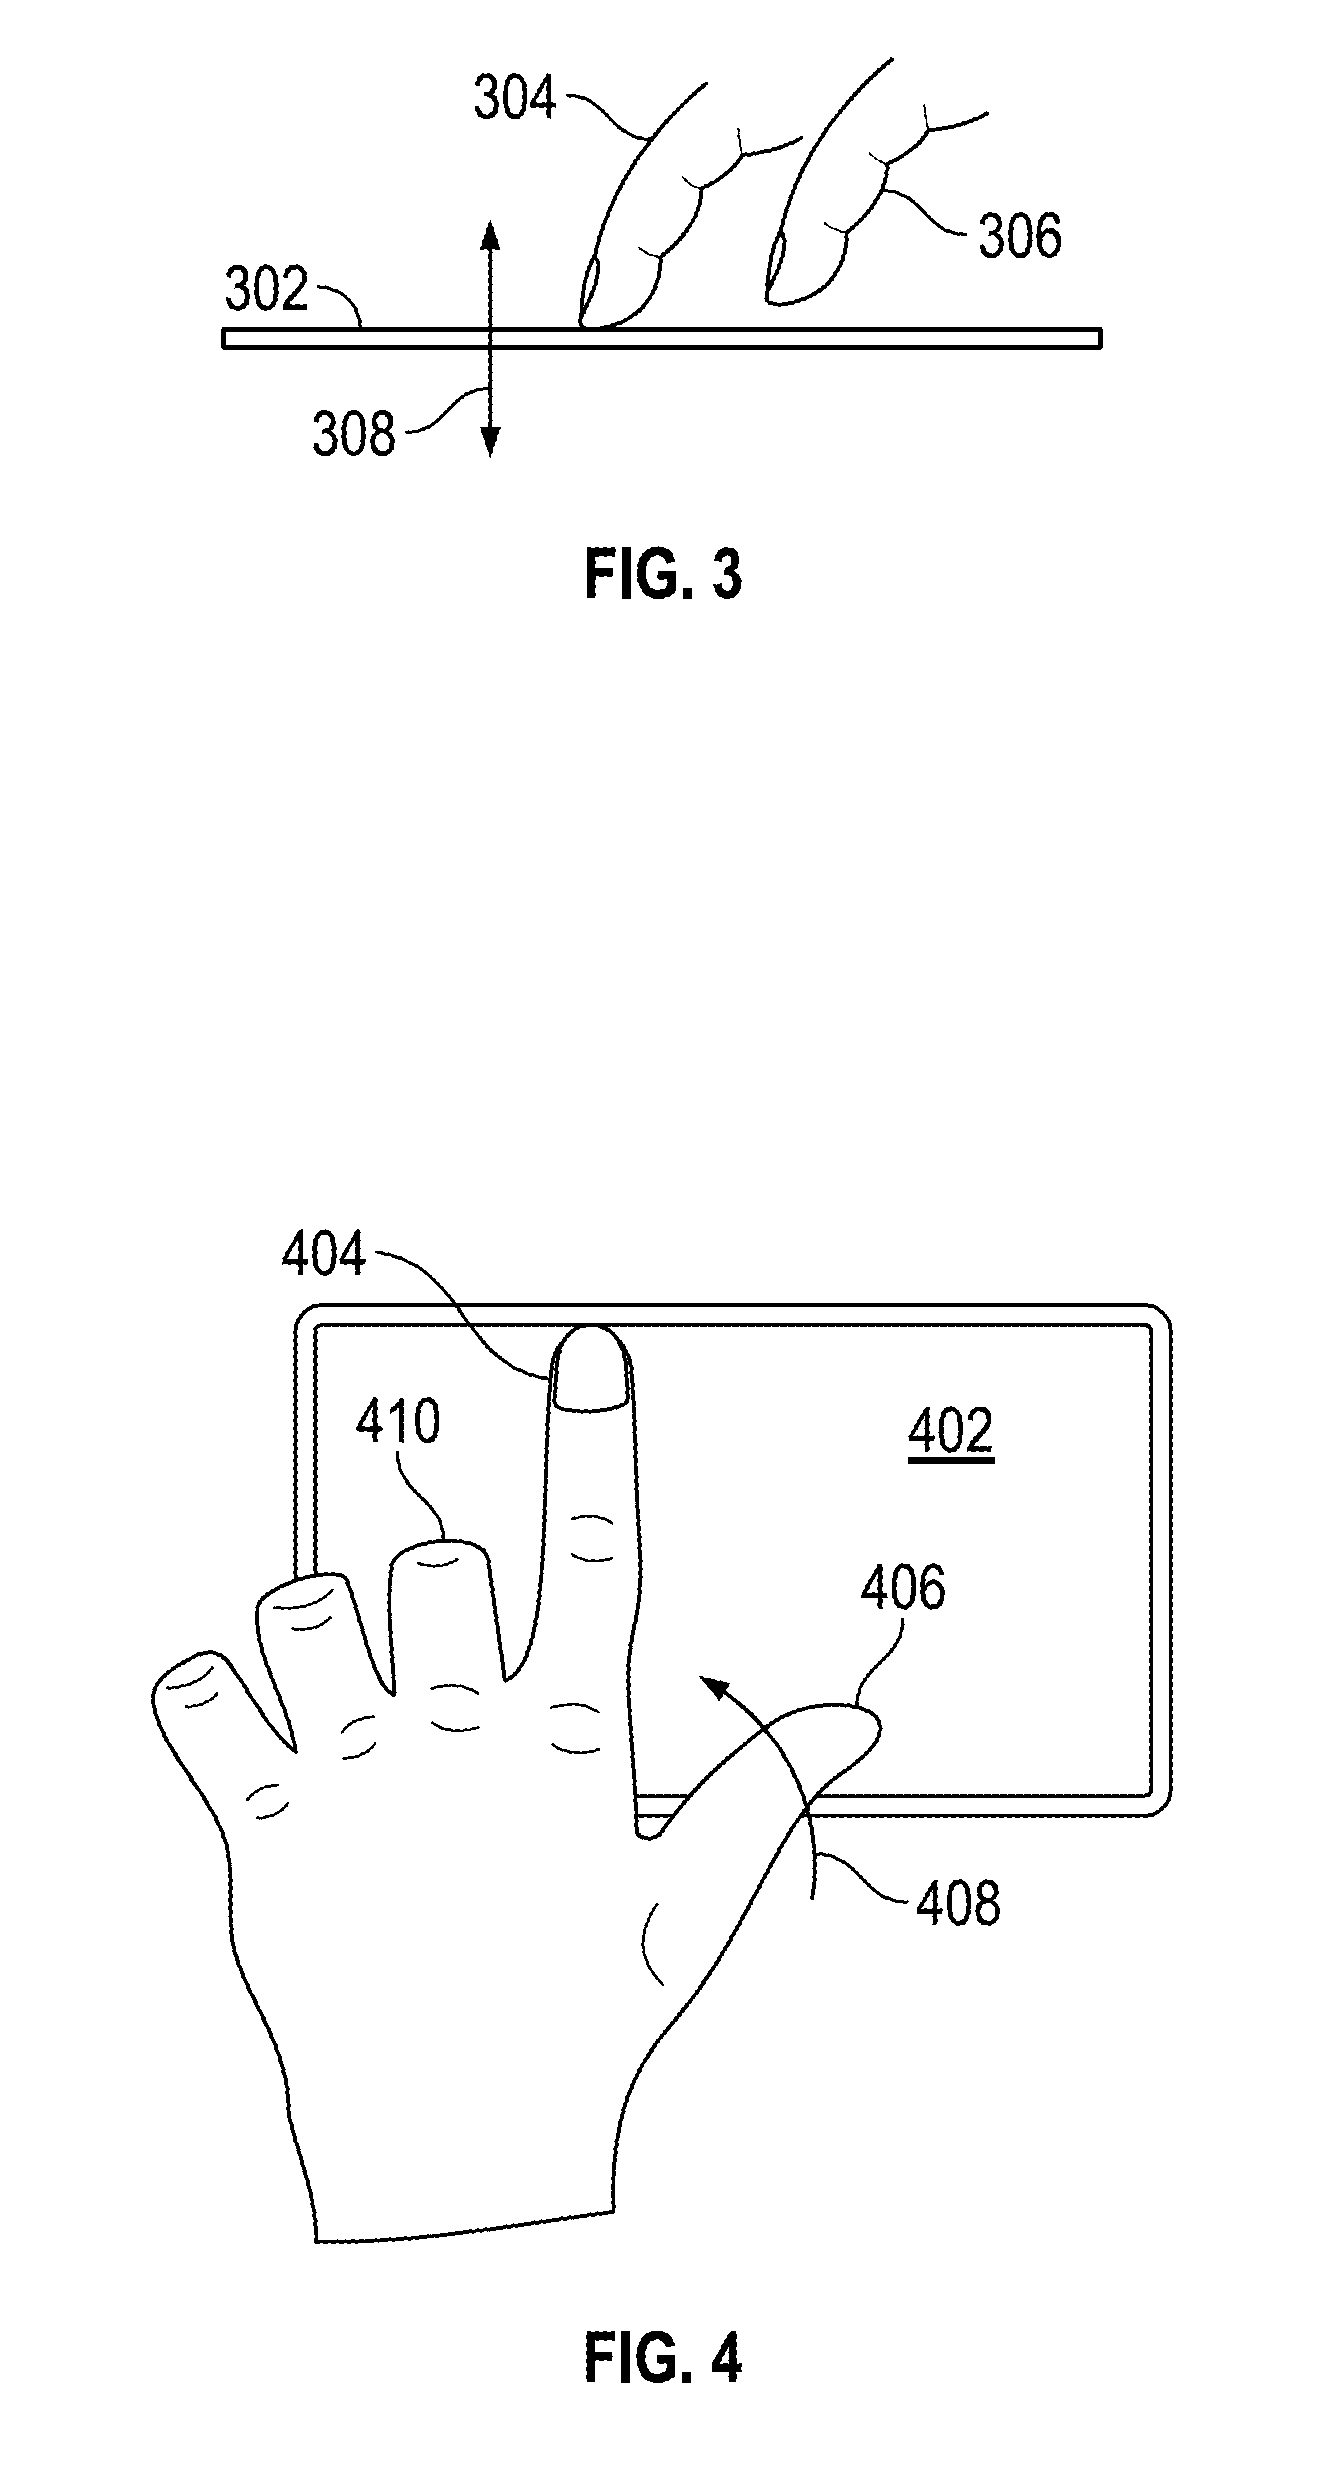 Systems and methods for dynamically modulating a user interface parameter using an input device